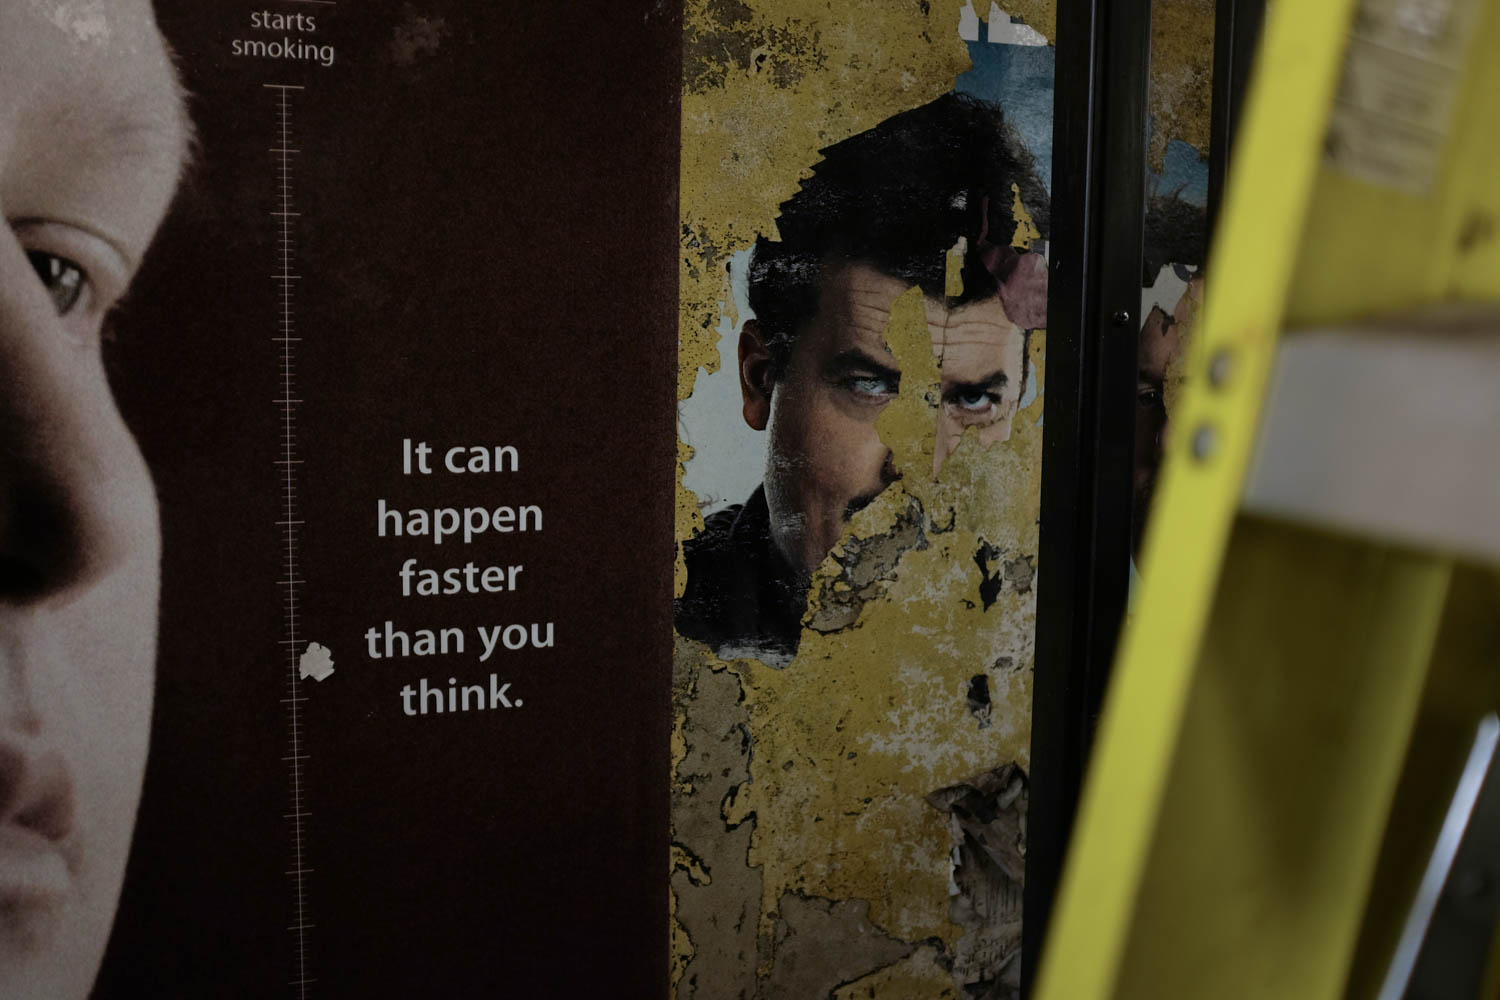 A photograph of the text "It can happen faster than you think" next to the chipped away picture of a face on an adjacent poster.